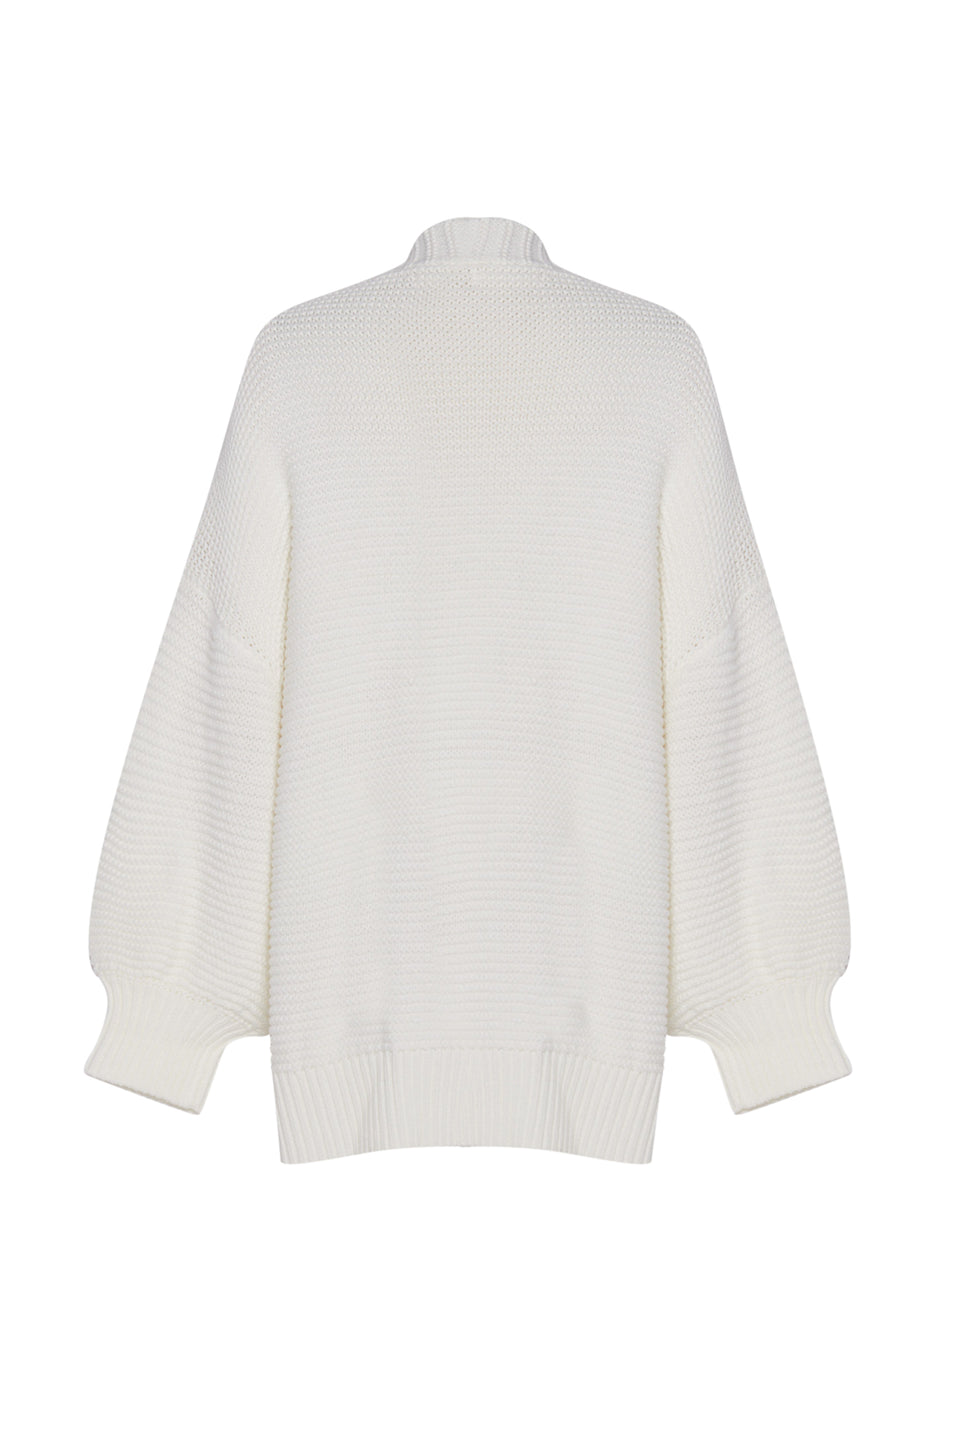 lani_the_label_brittany_cardigan_sweater_white